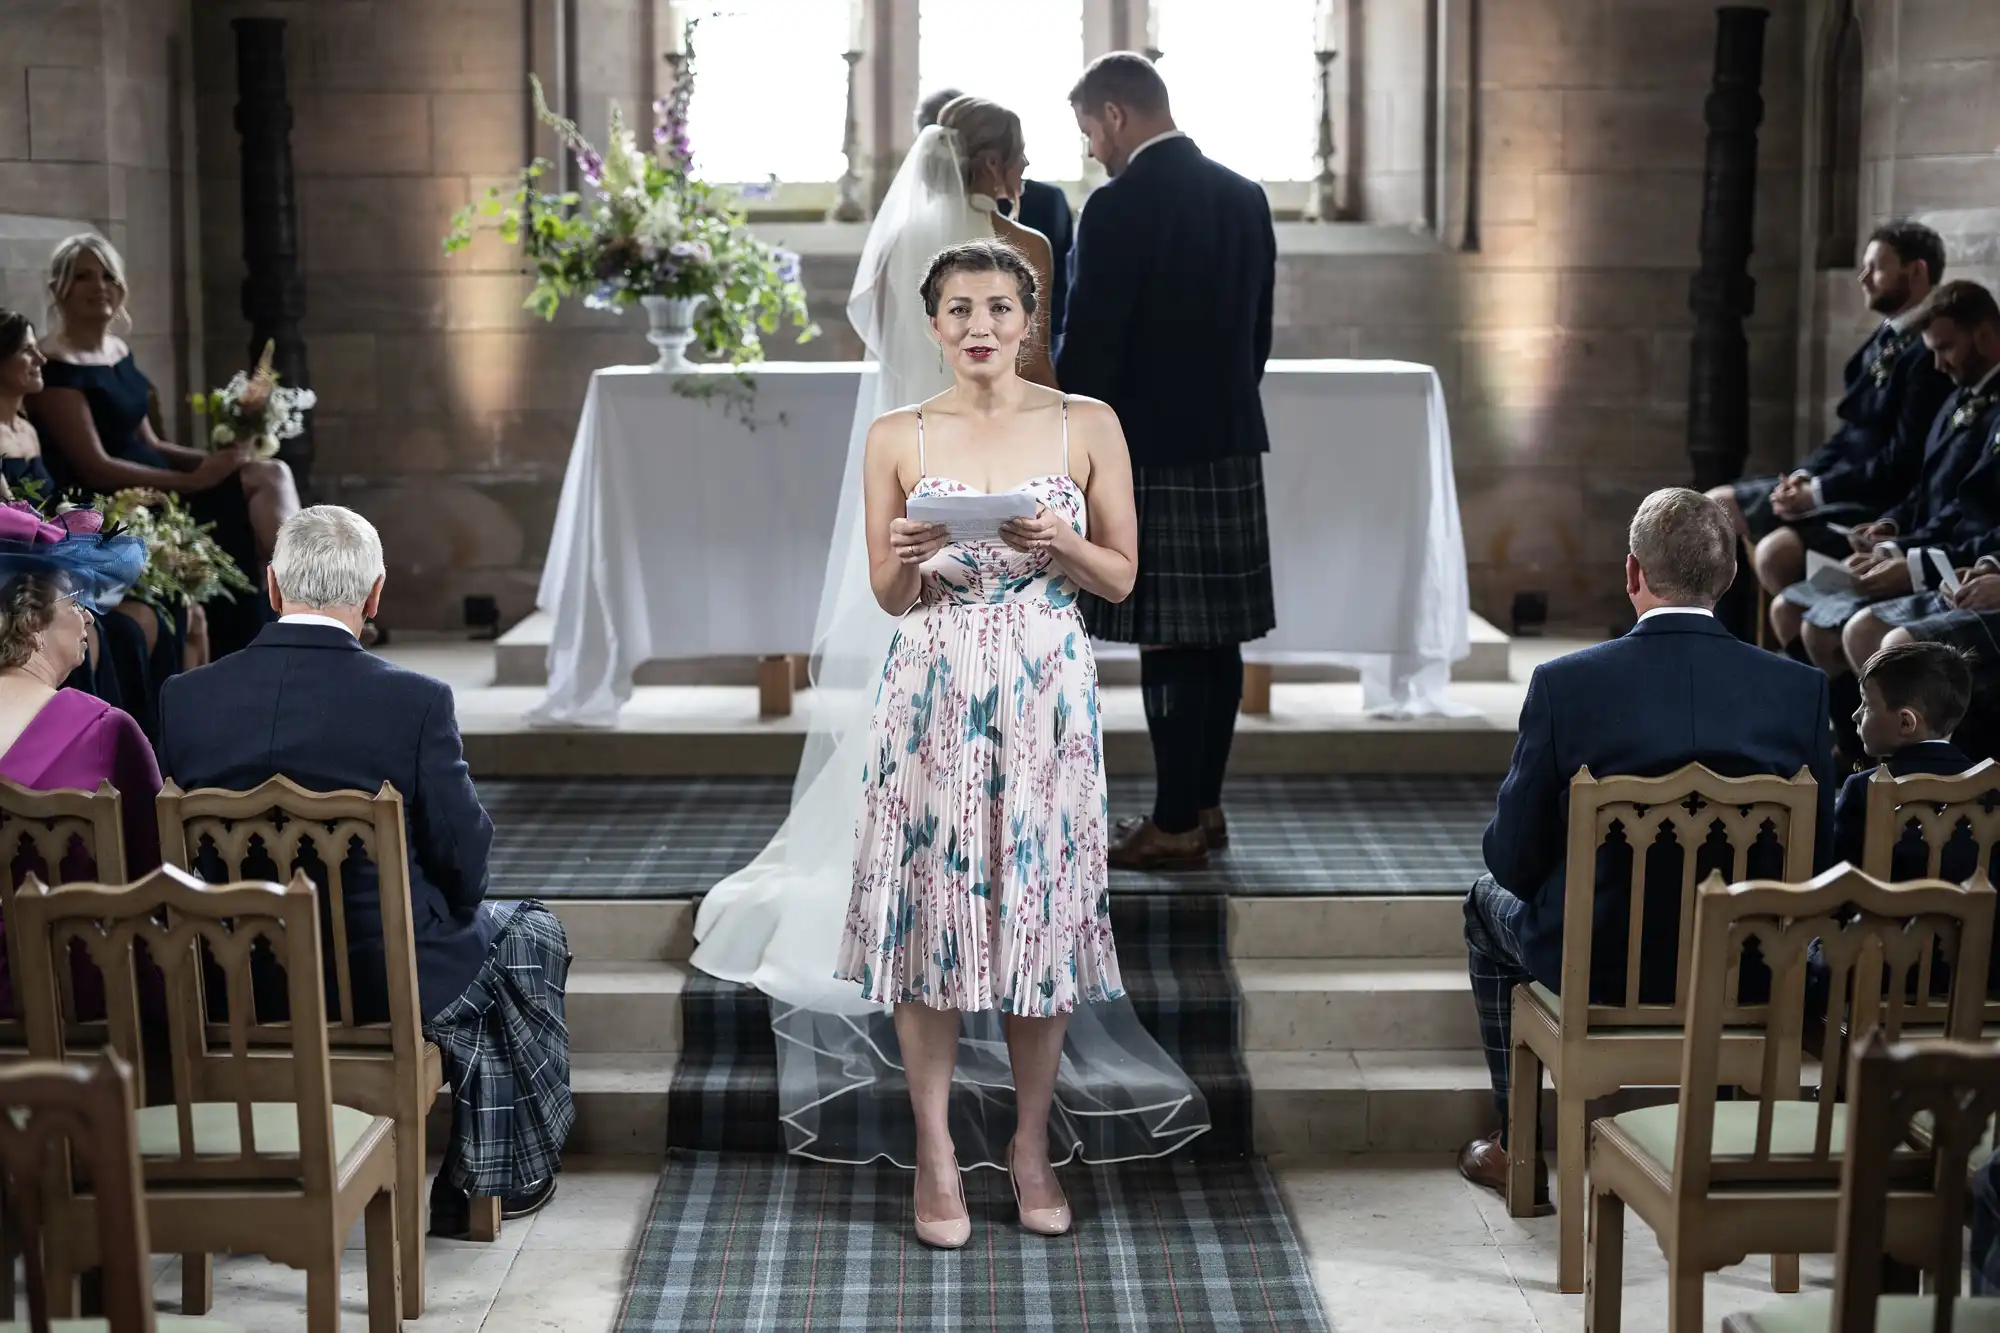 A woman reads from a card at a wedding ceremony in a church, with guests seated around and a couple at the altar in the background.